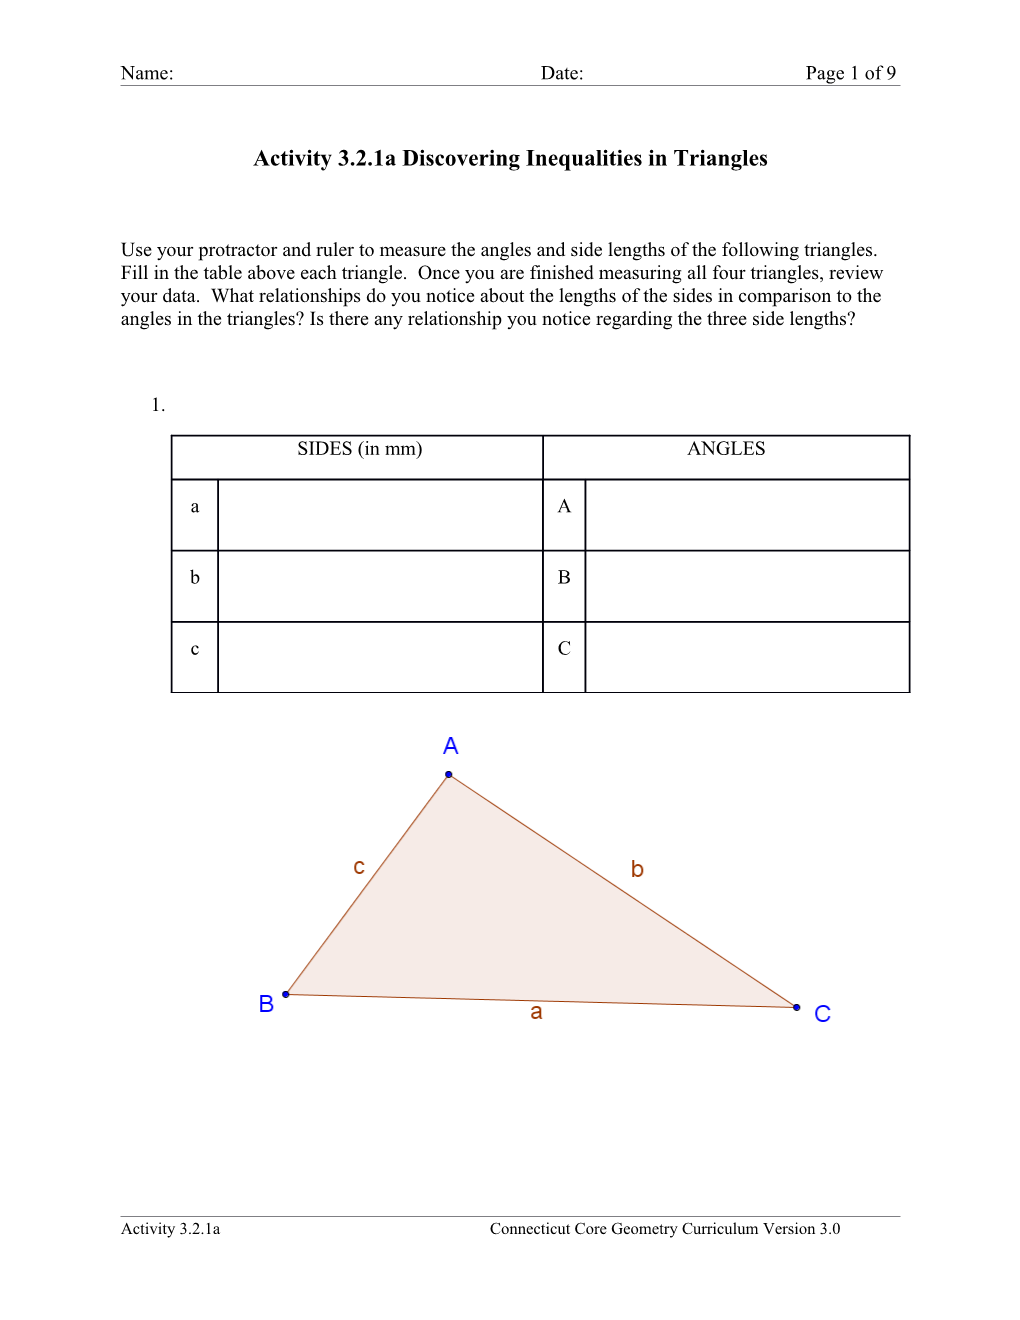 Activity 3.2.1A Discovering Inequalities in Triangles